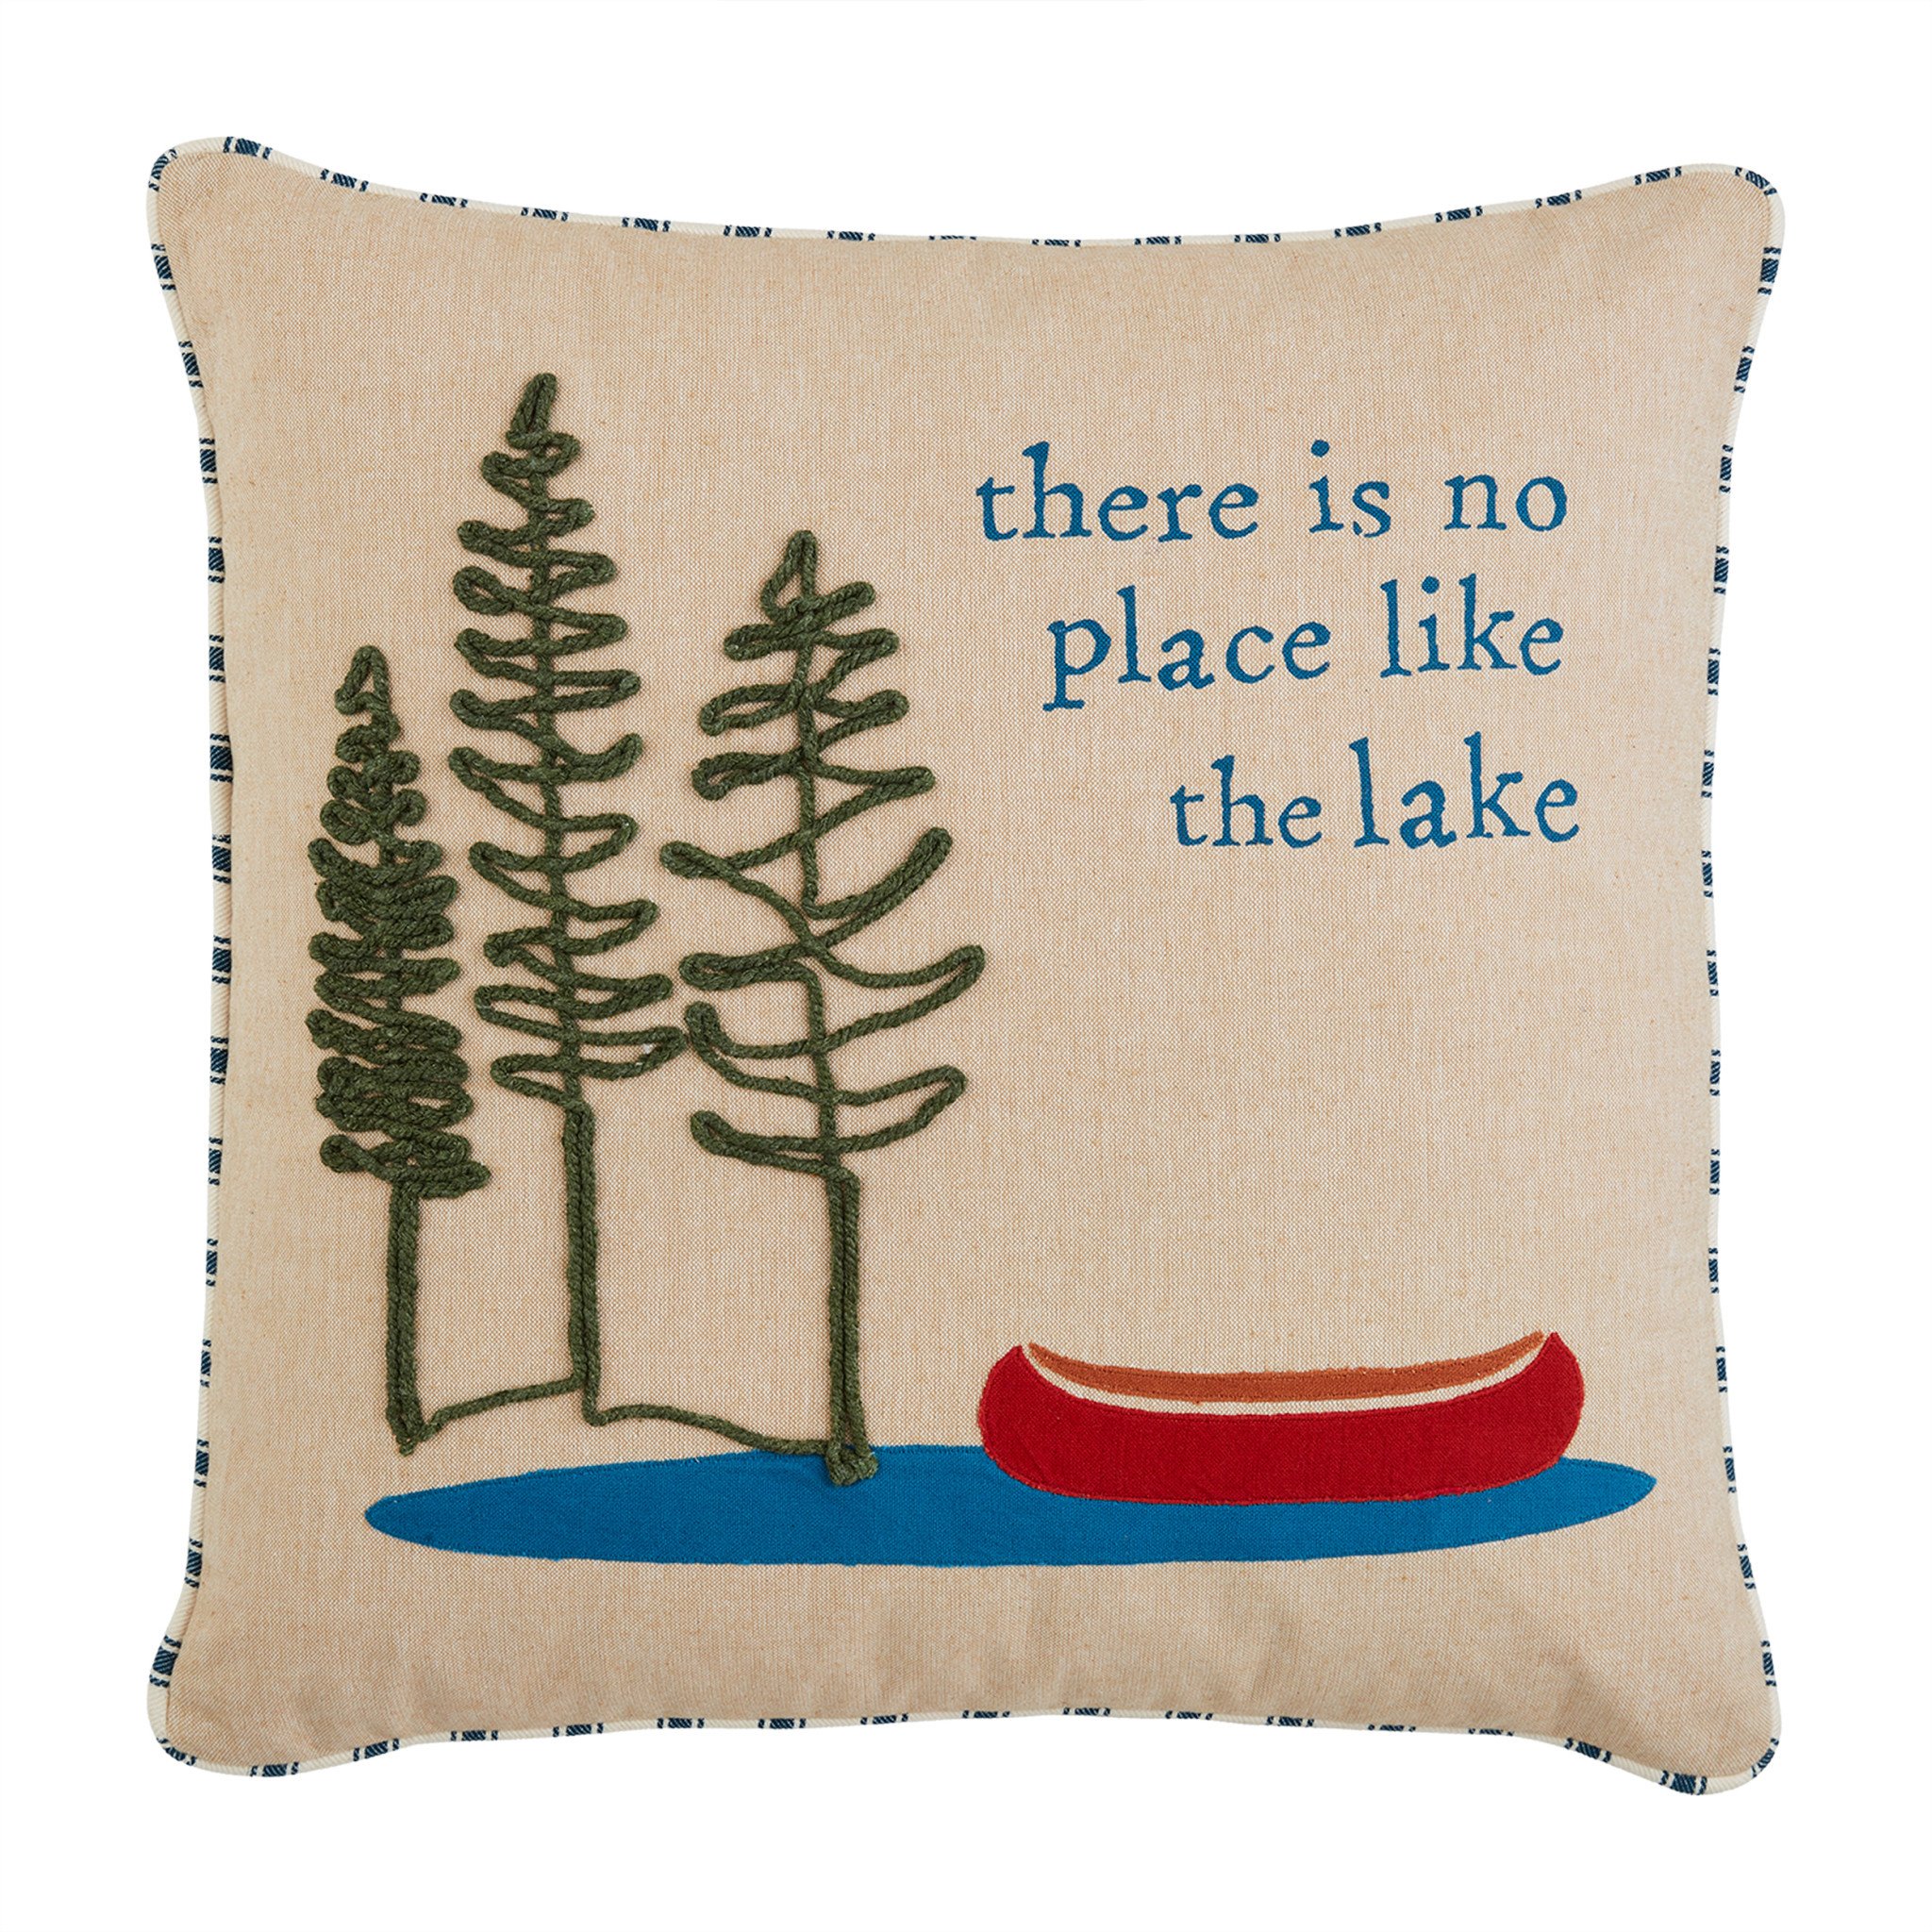 Mudpie THERE IS APPLIQUE LAKE PILLOW